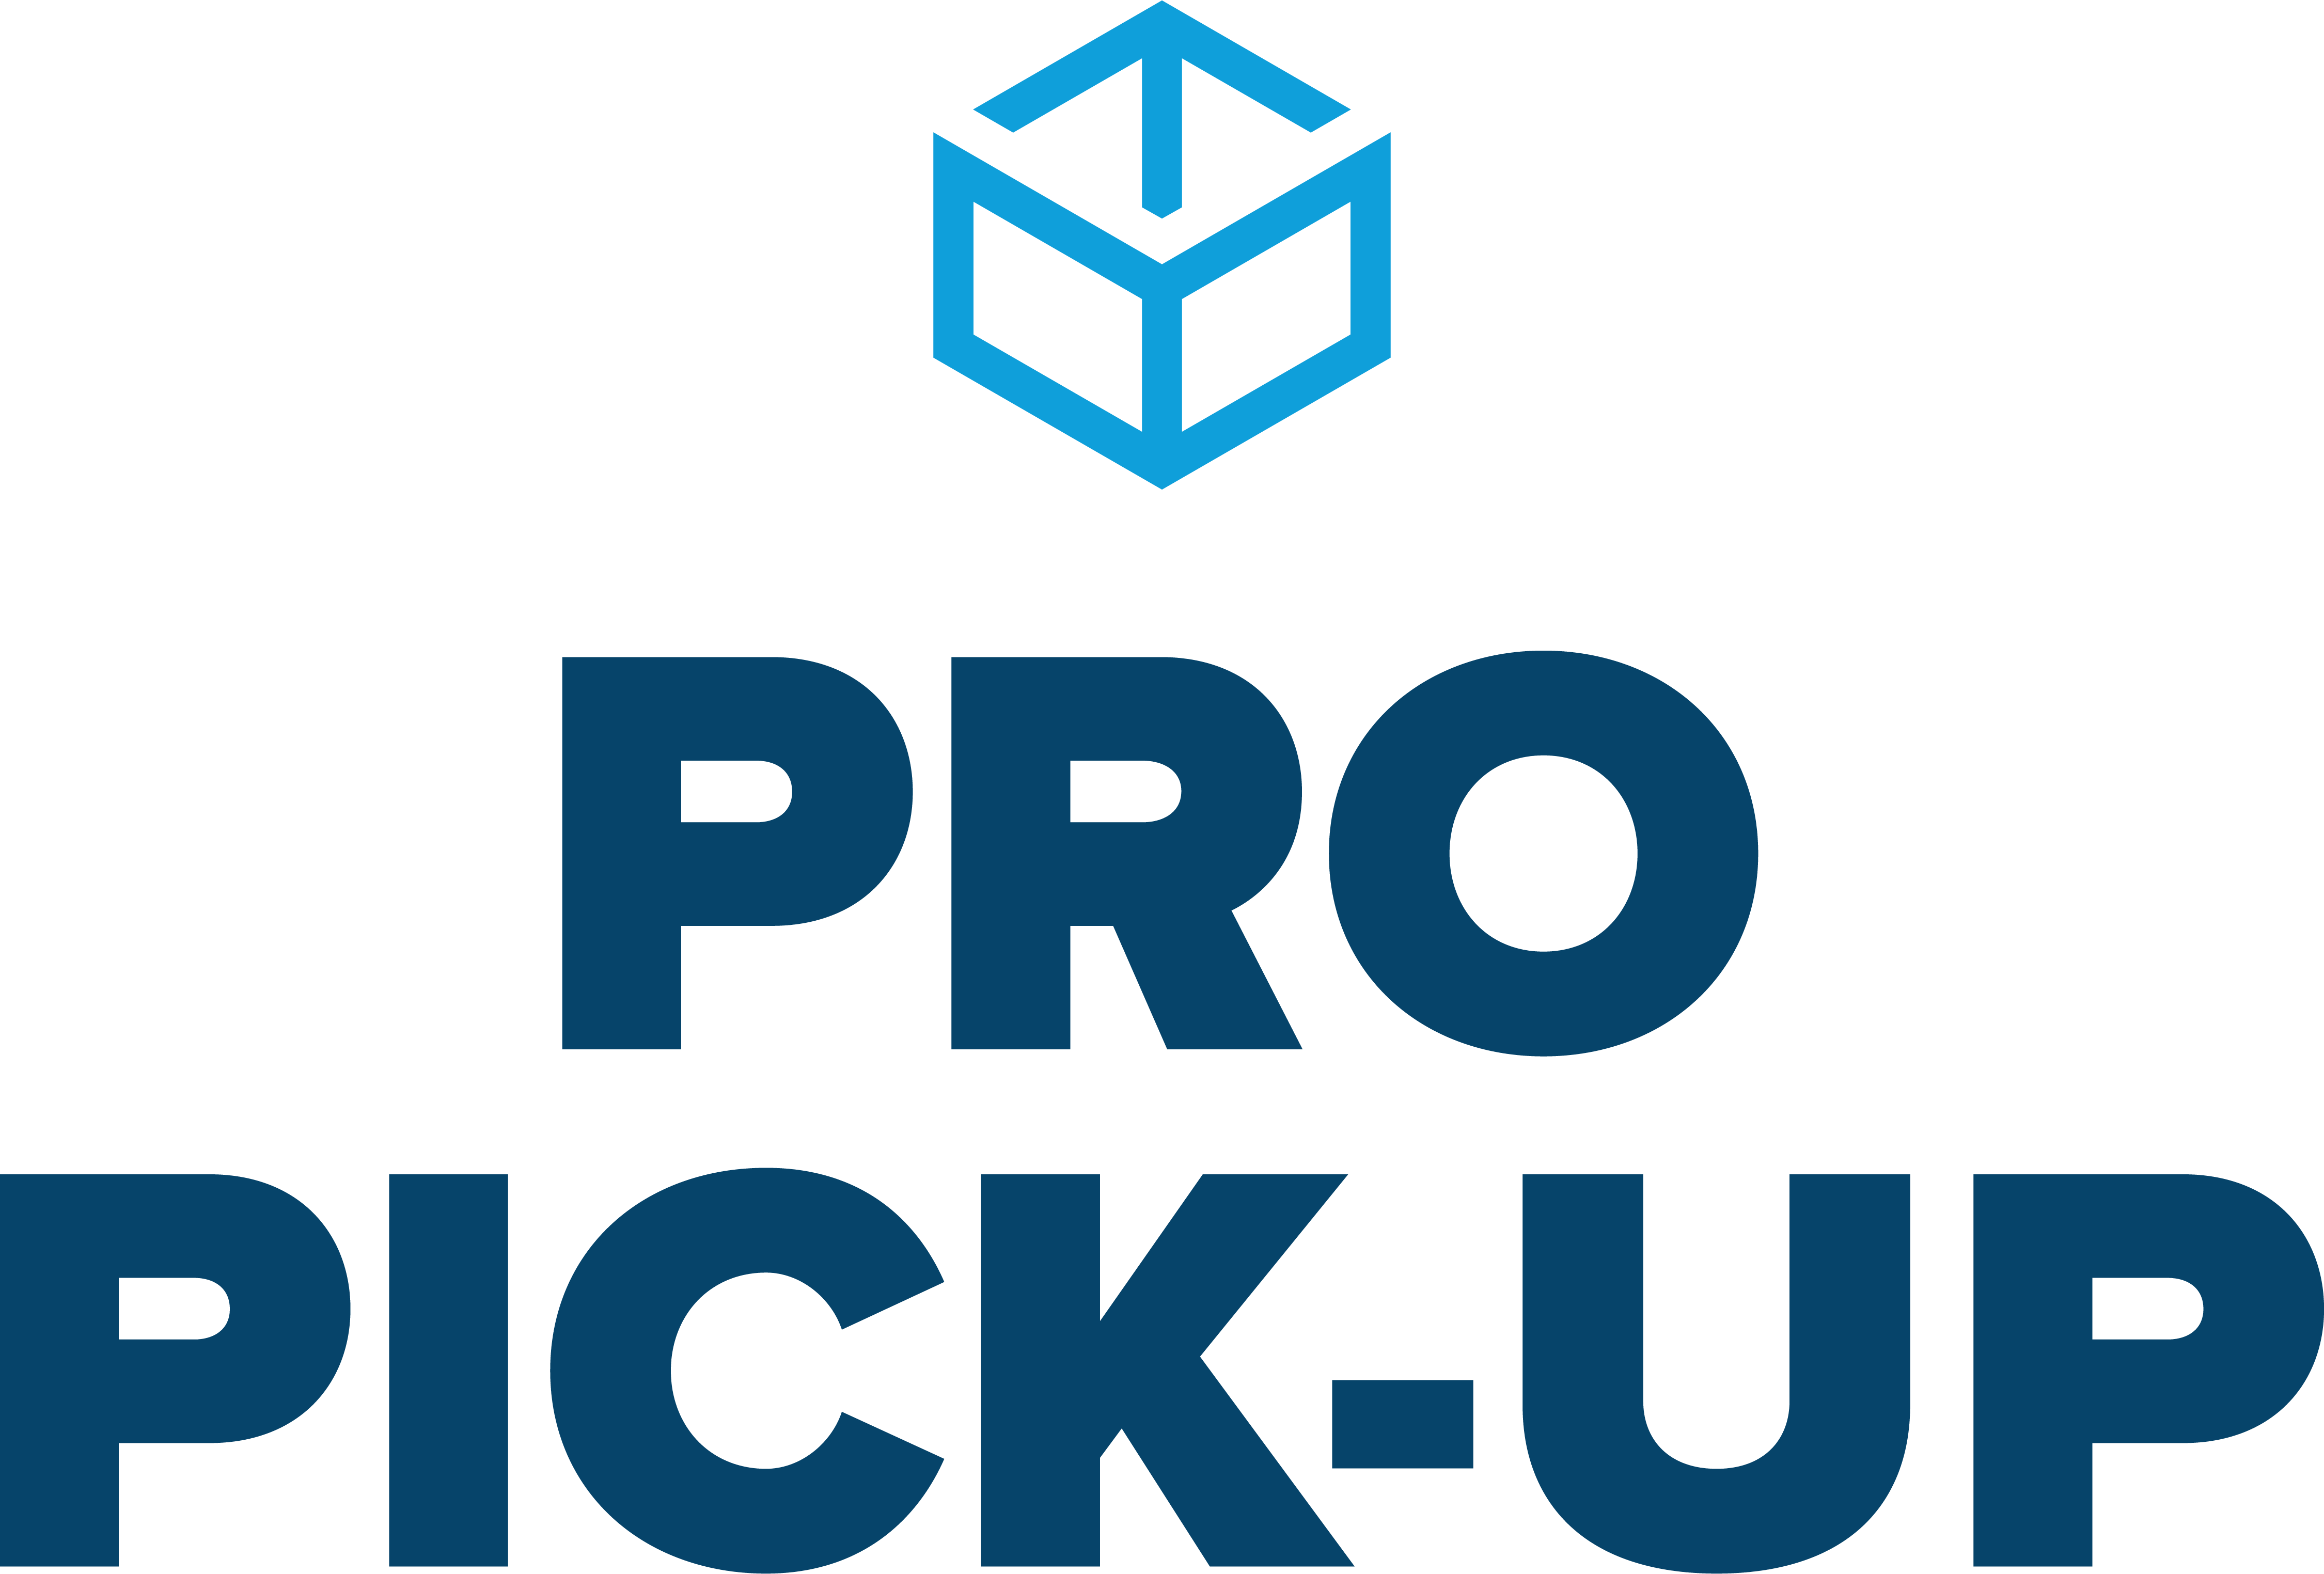 PRO PICK-UP logo in blue with a light blue box above it.